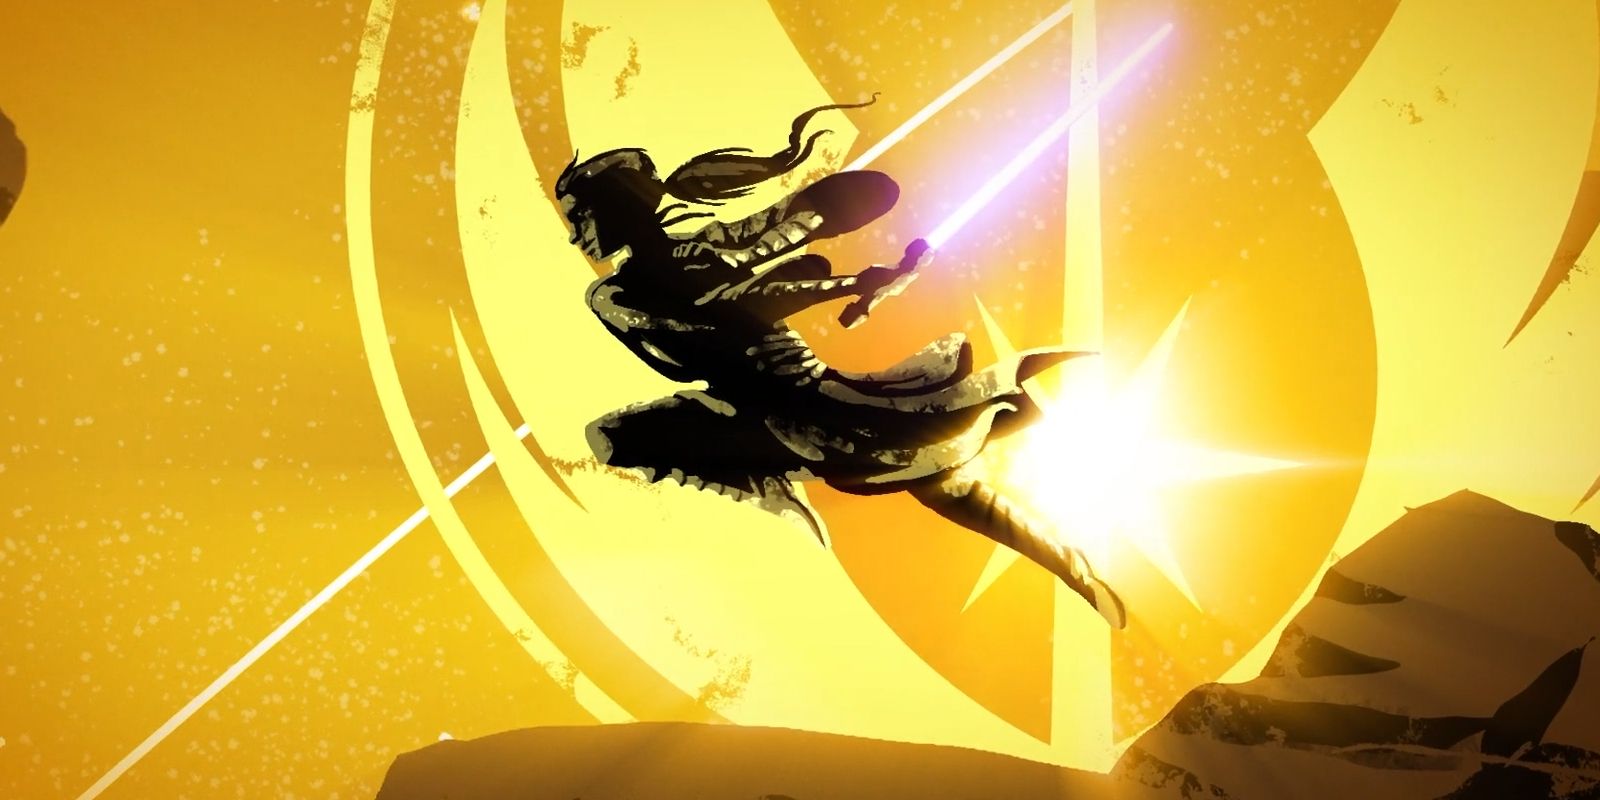 Vernestra Rwoh leaps with her lightsaber in Star Wars The High Republic. The Jedi emblem is in the background.